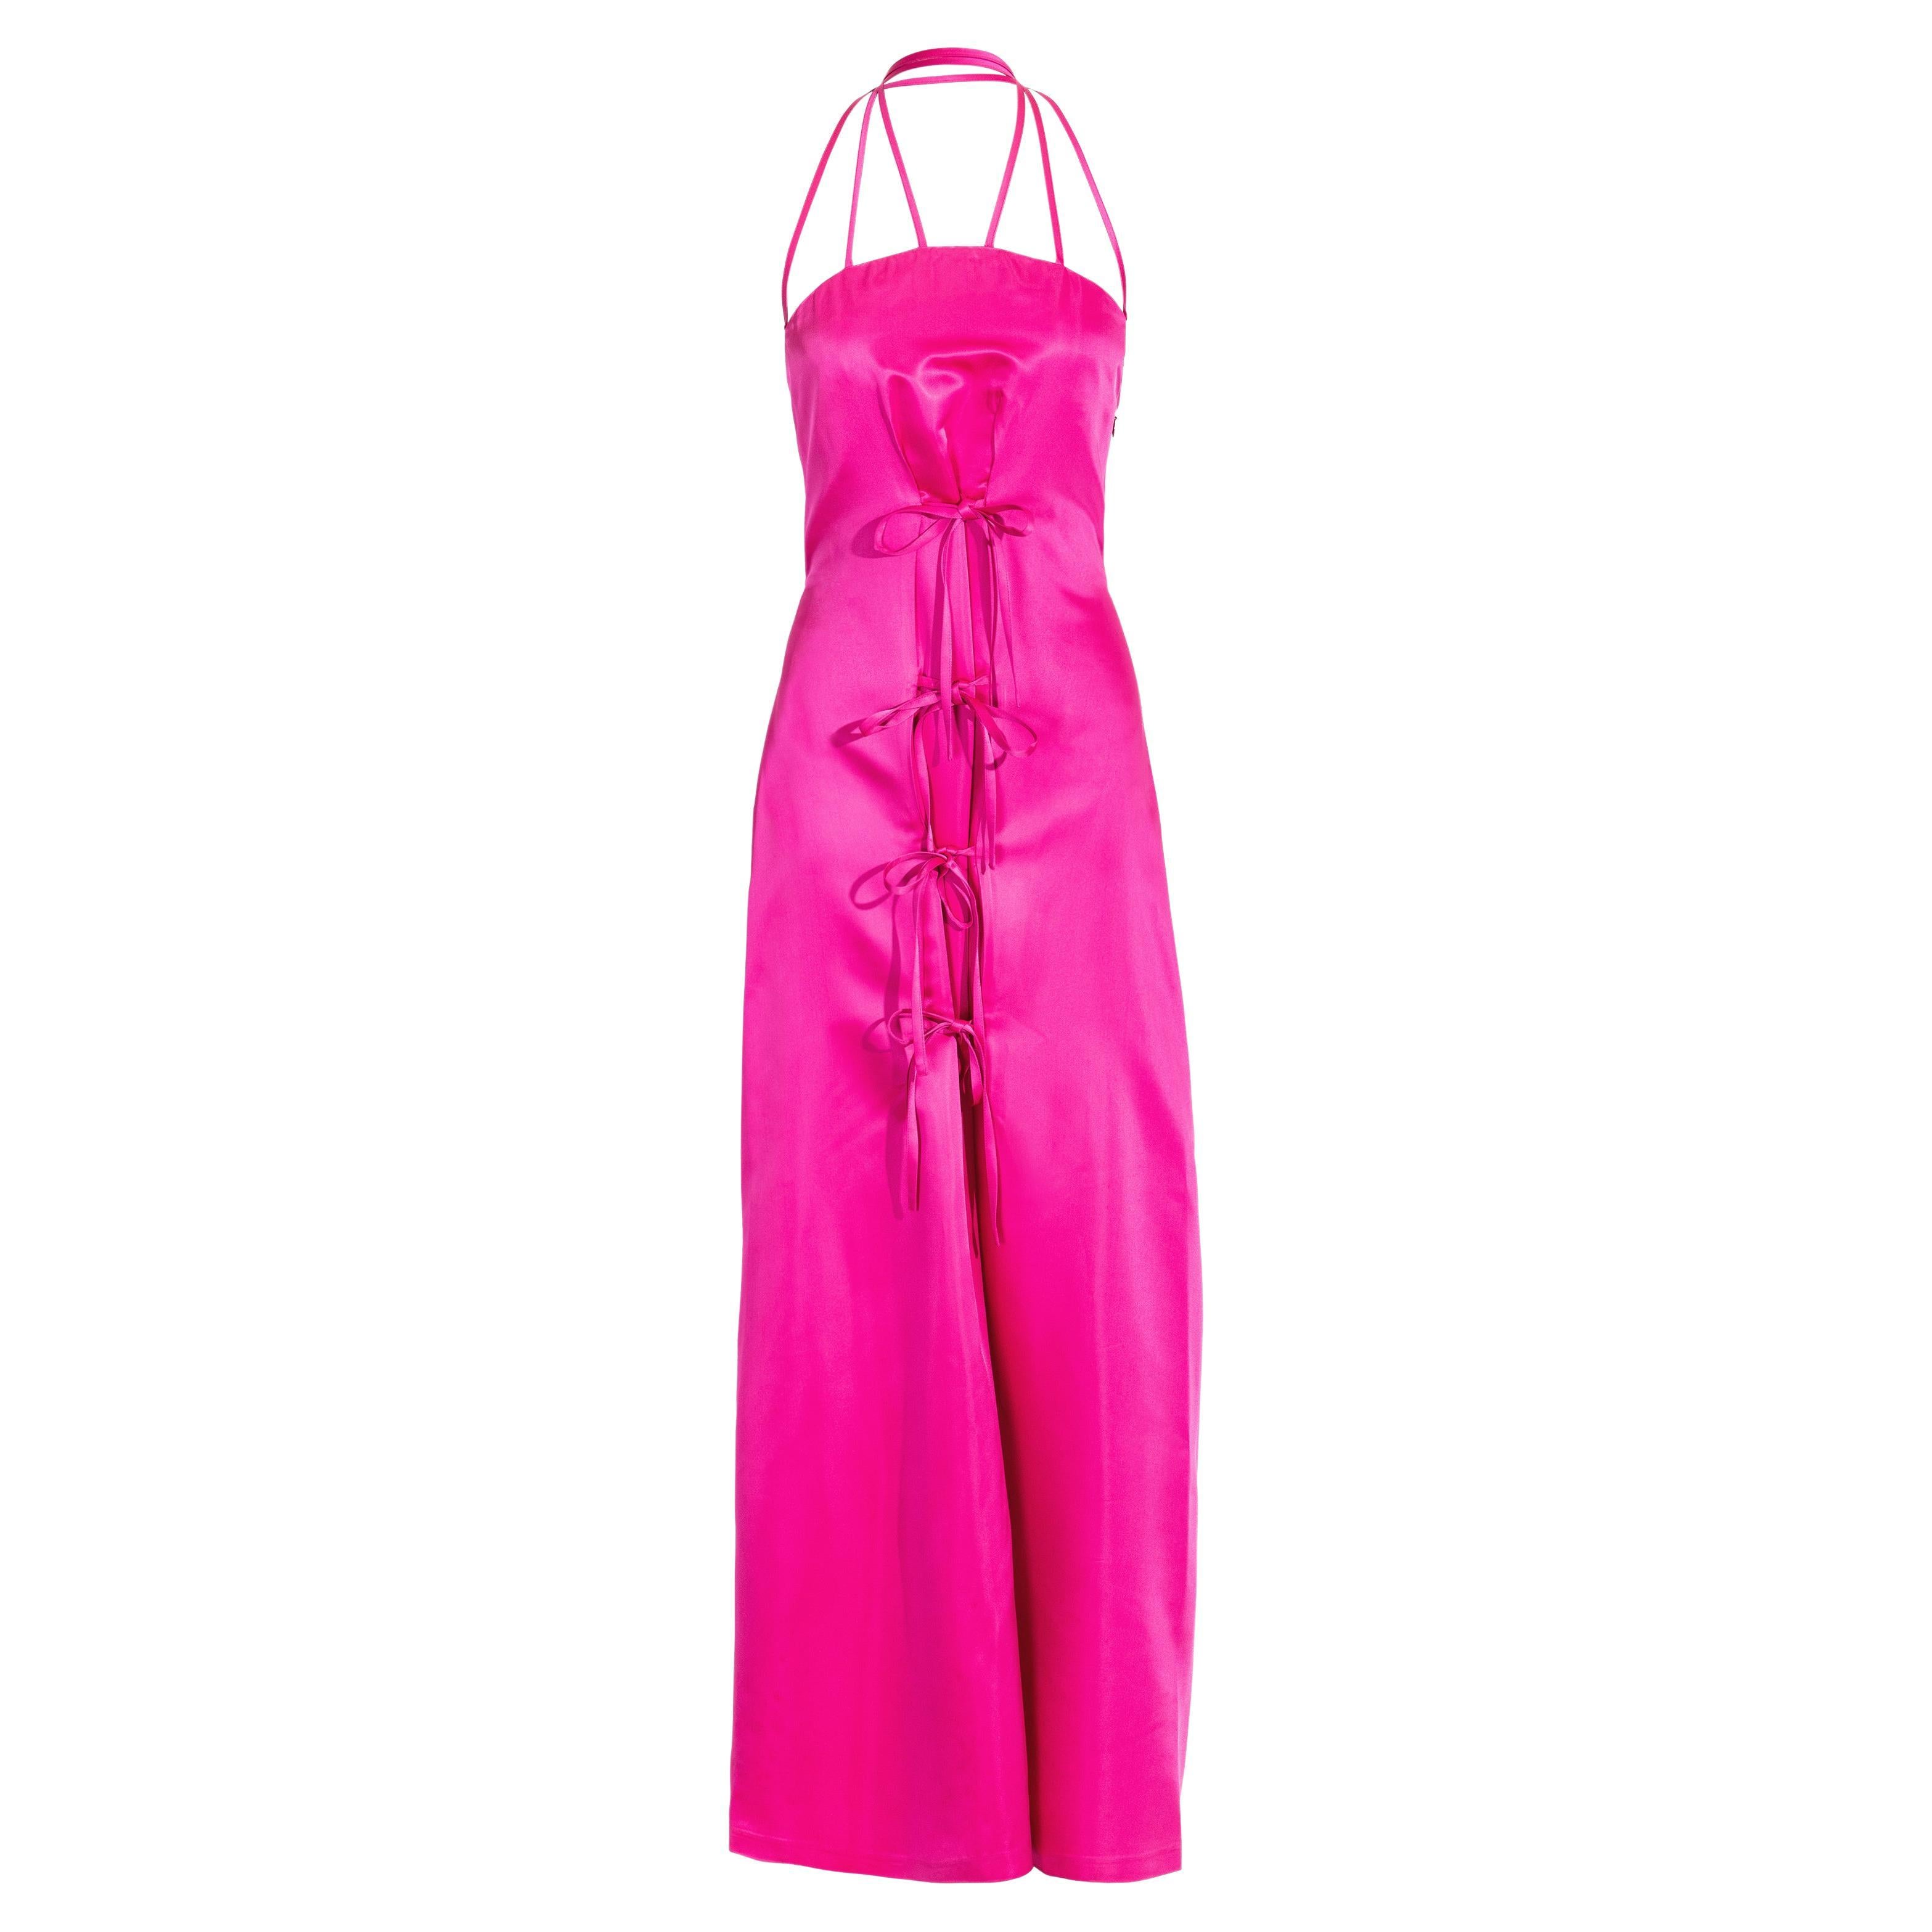 S/S 1999 Vivienne Westwood Red Label Hot Pink Silk Gown with Front Ties For Sale